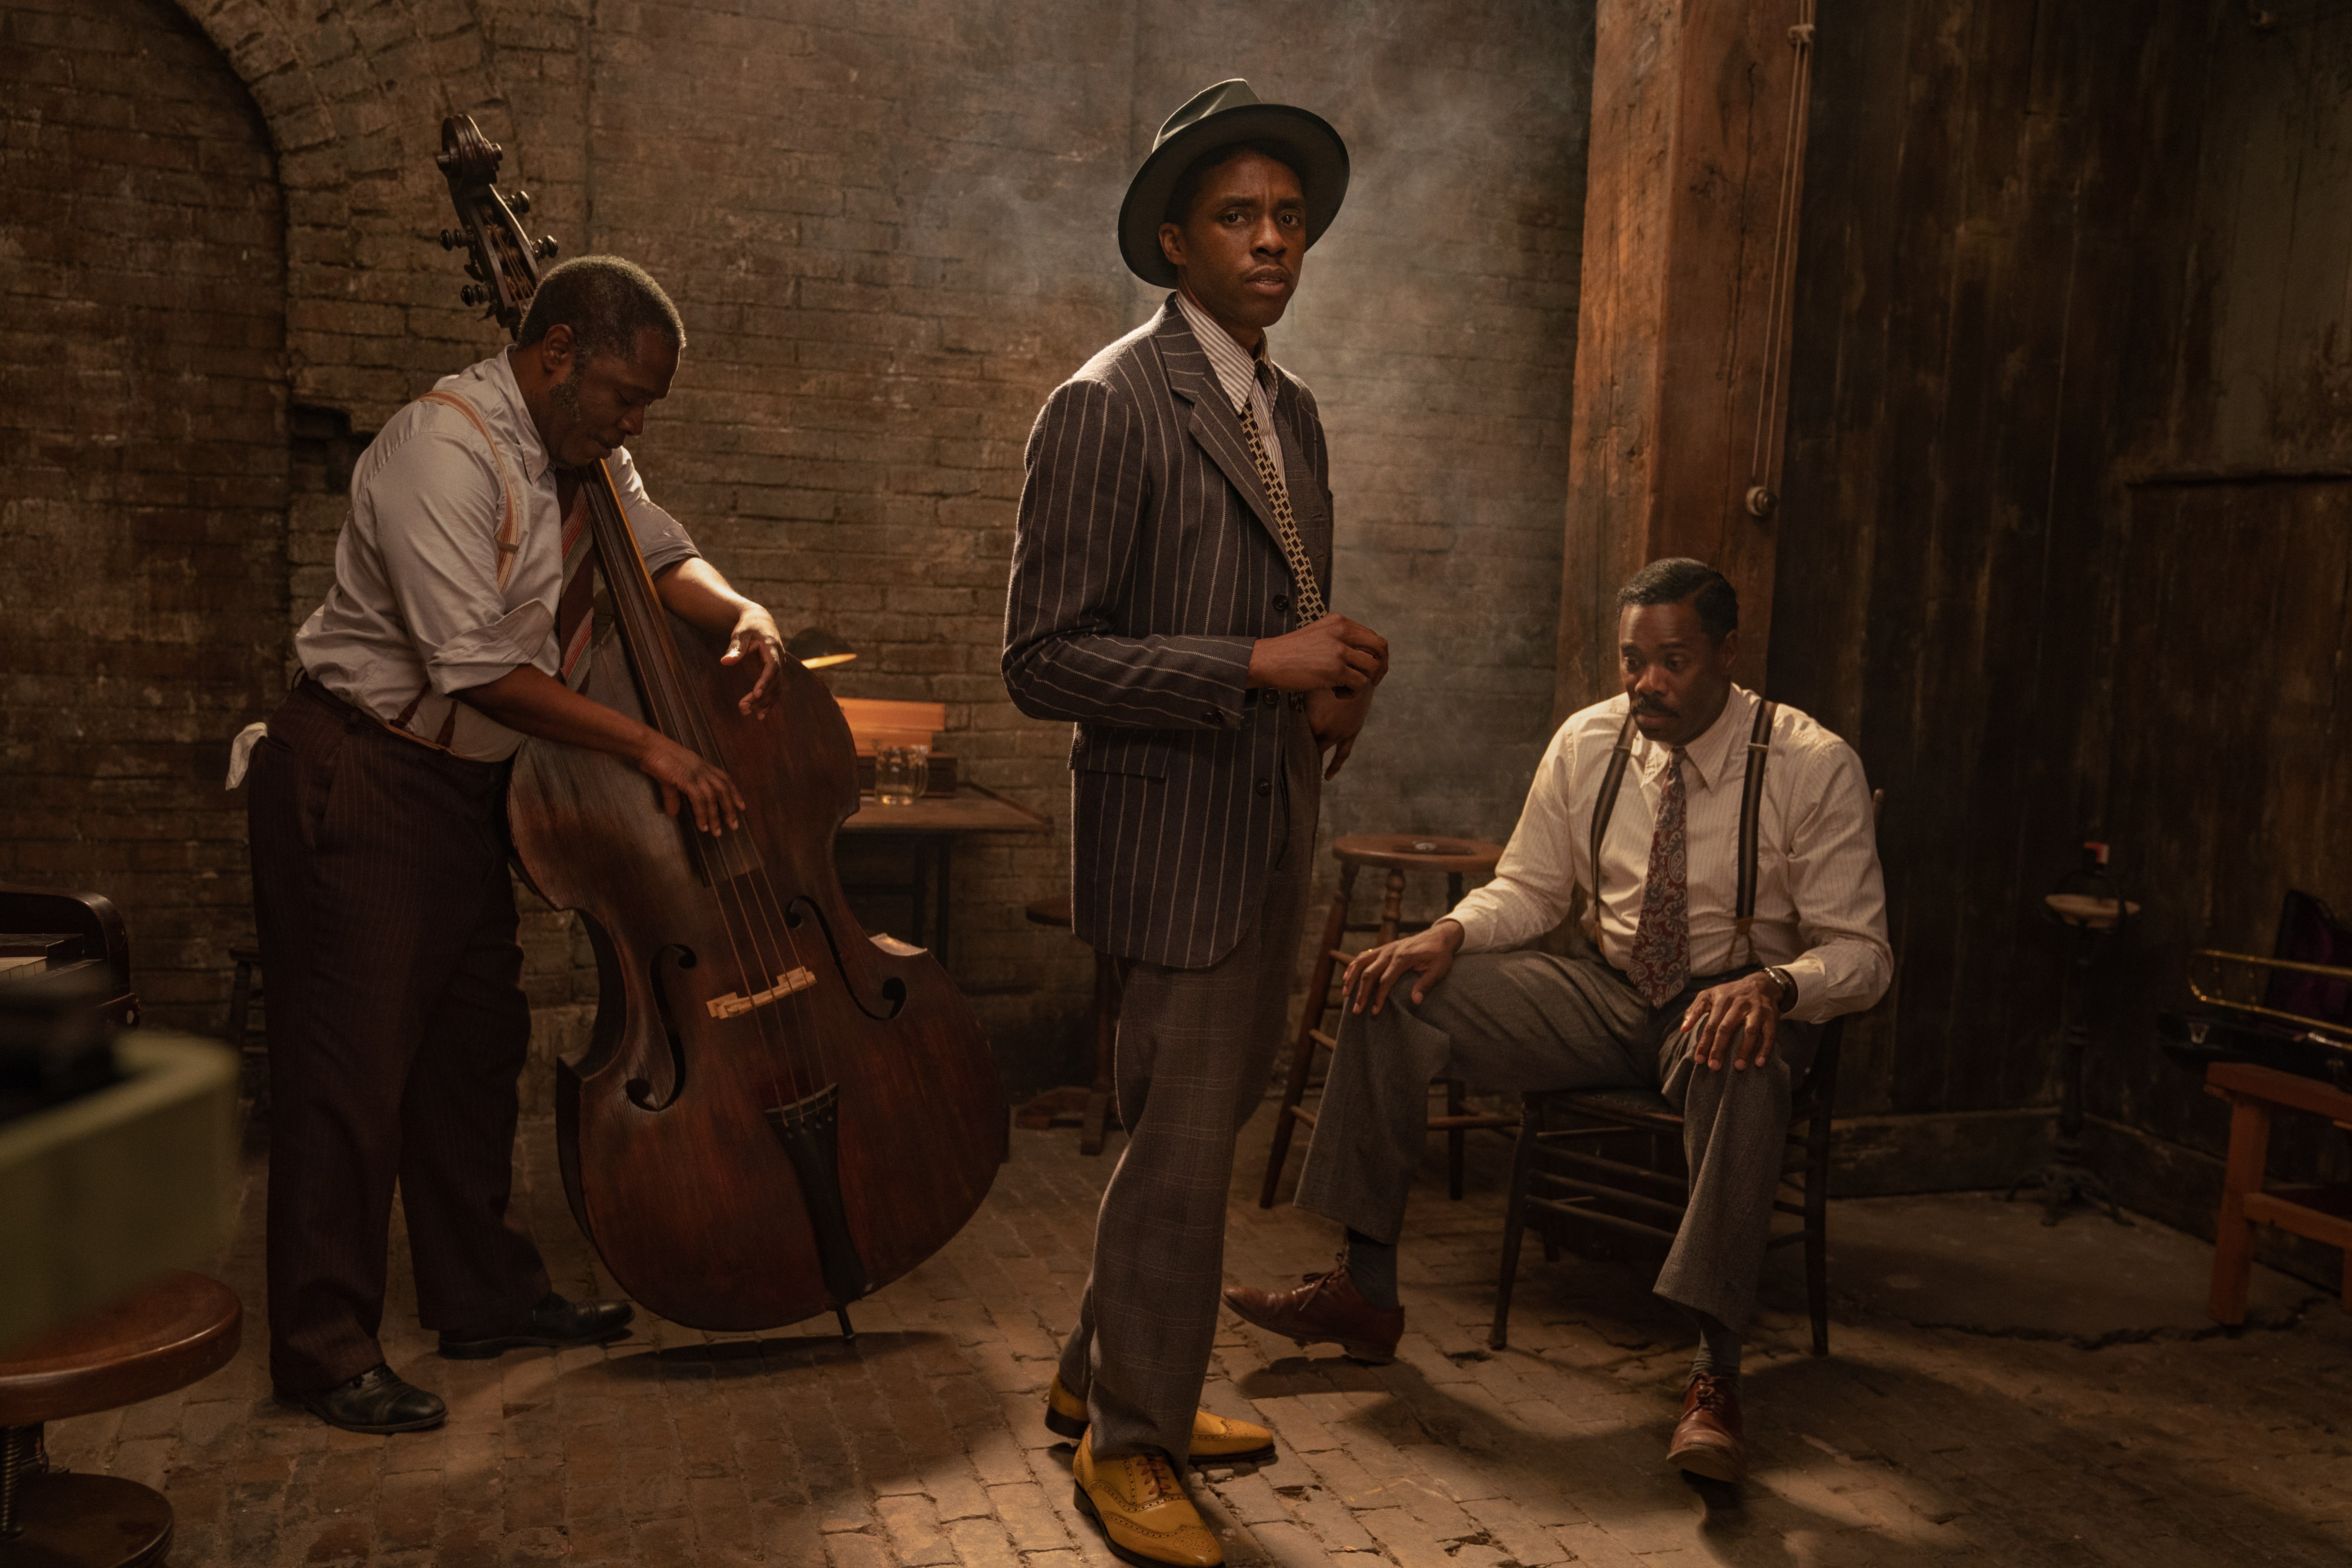 Chadwick Boseman stands in a pinstriped suit and fedora, in front of a man with an upright bass and another man seated in a chair.